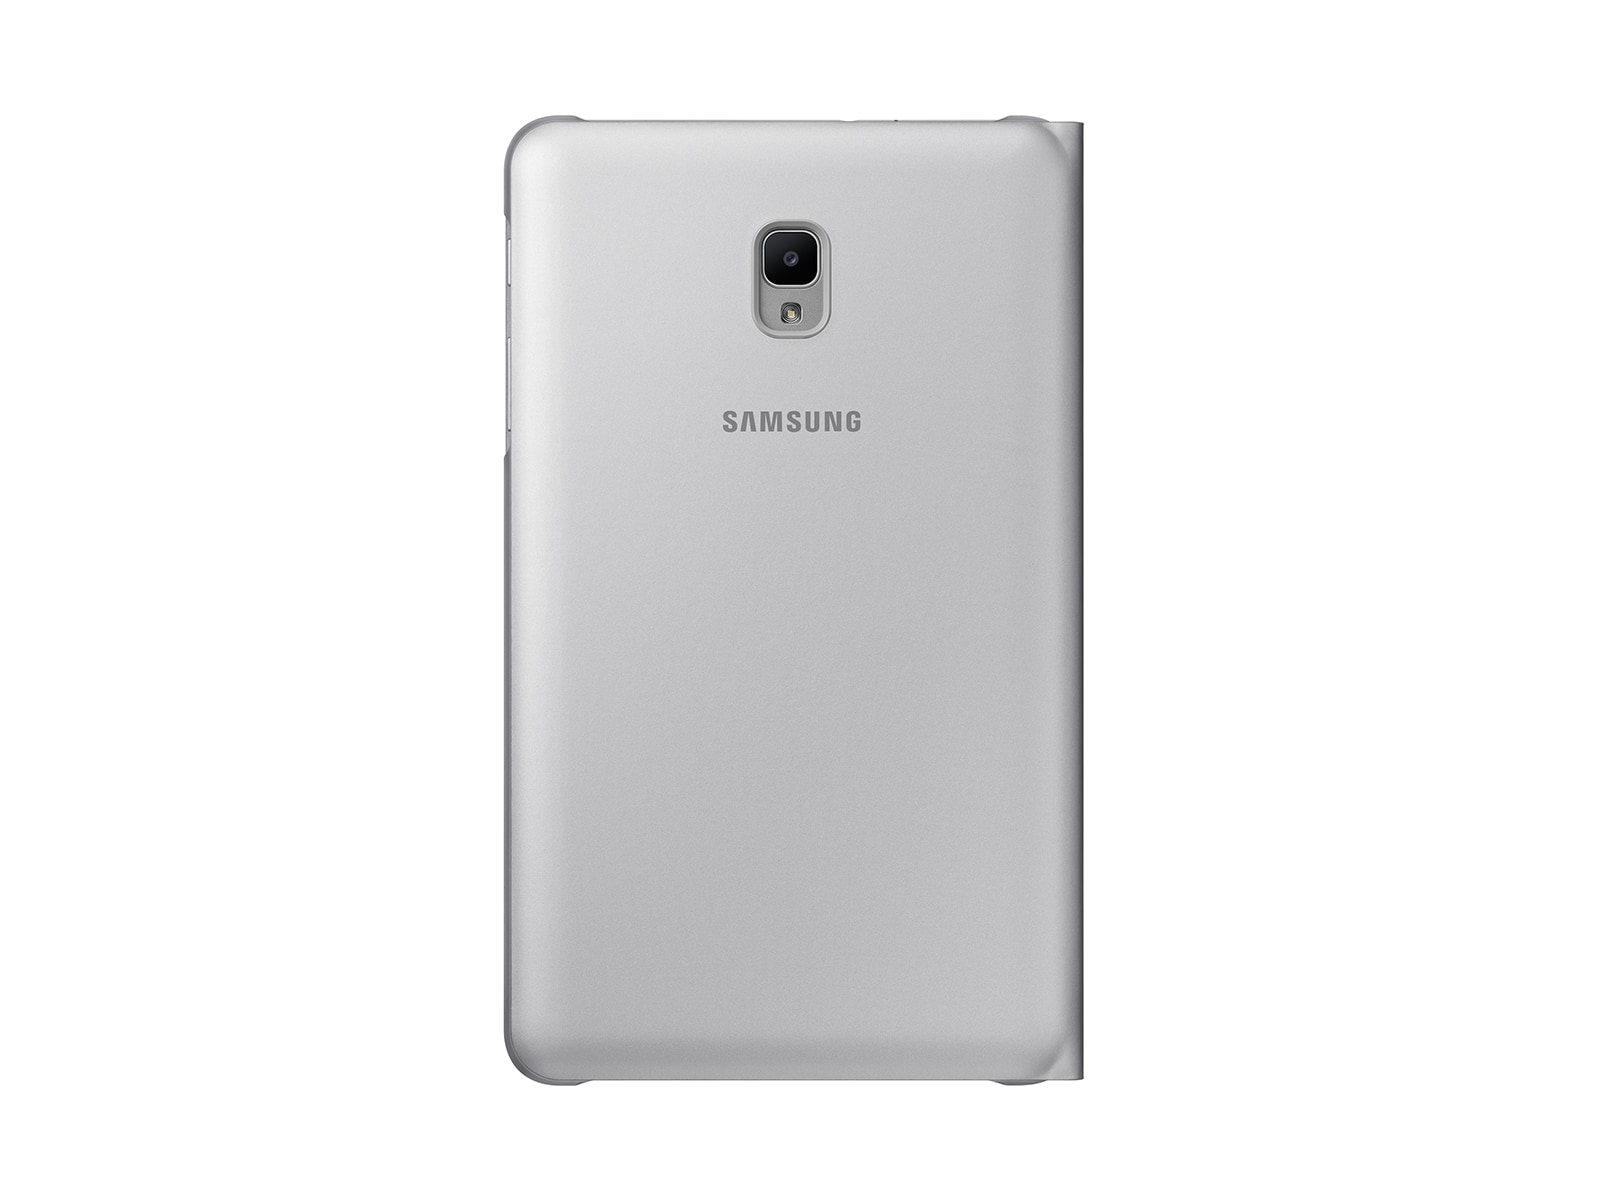 stil factor Aanmoediging Galaxy Tab A 8.0" (New) Book Cover, Silver Mobile Accessories -  EF-BT385PSEGUJ | Samsung US